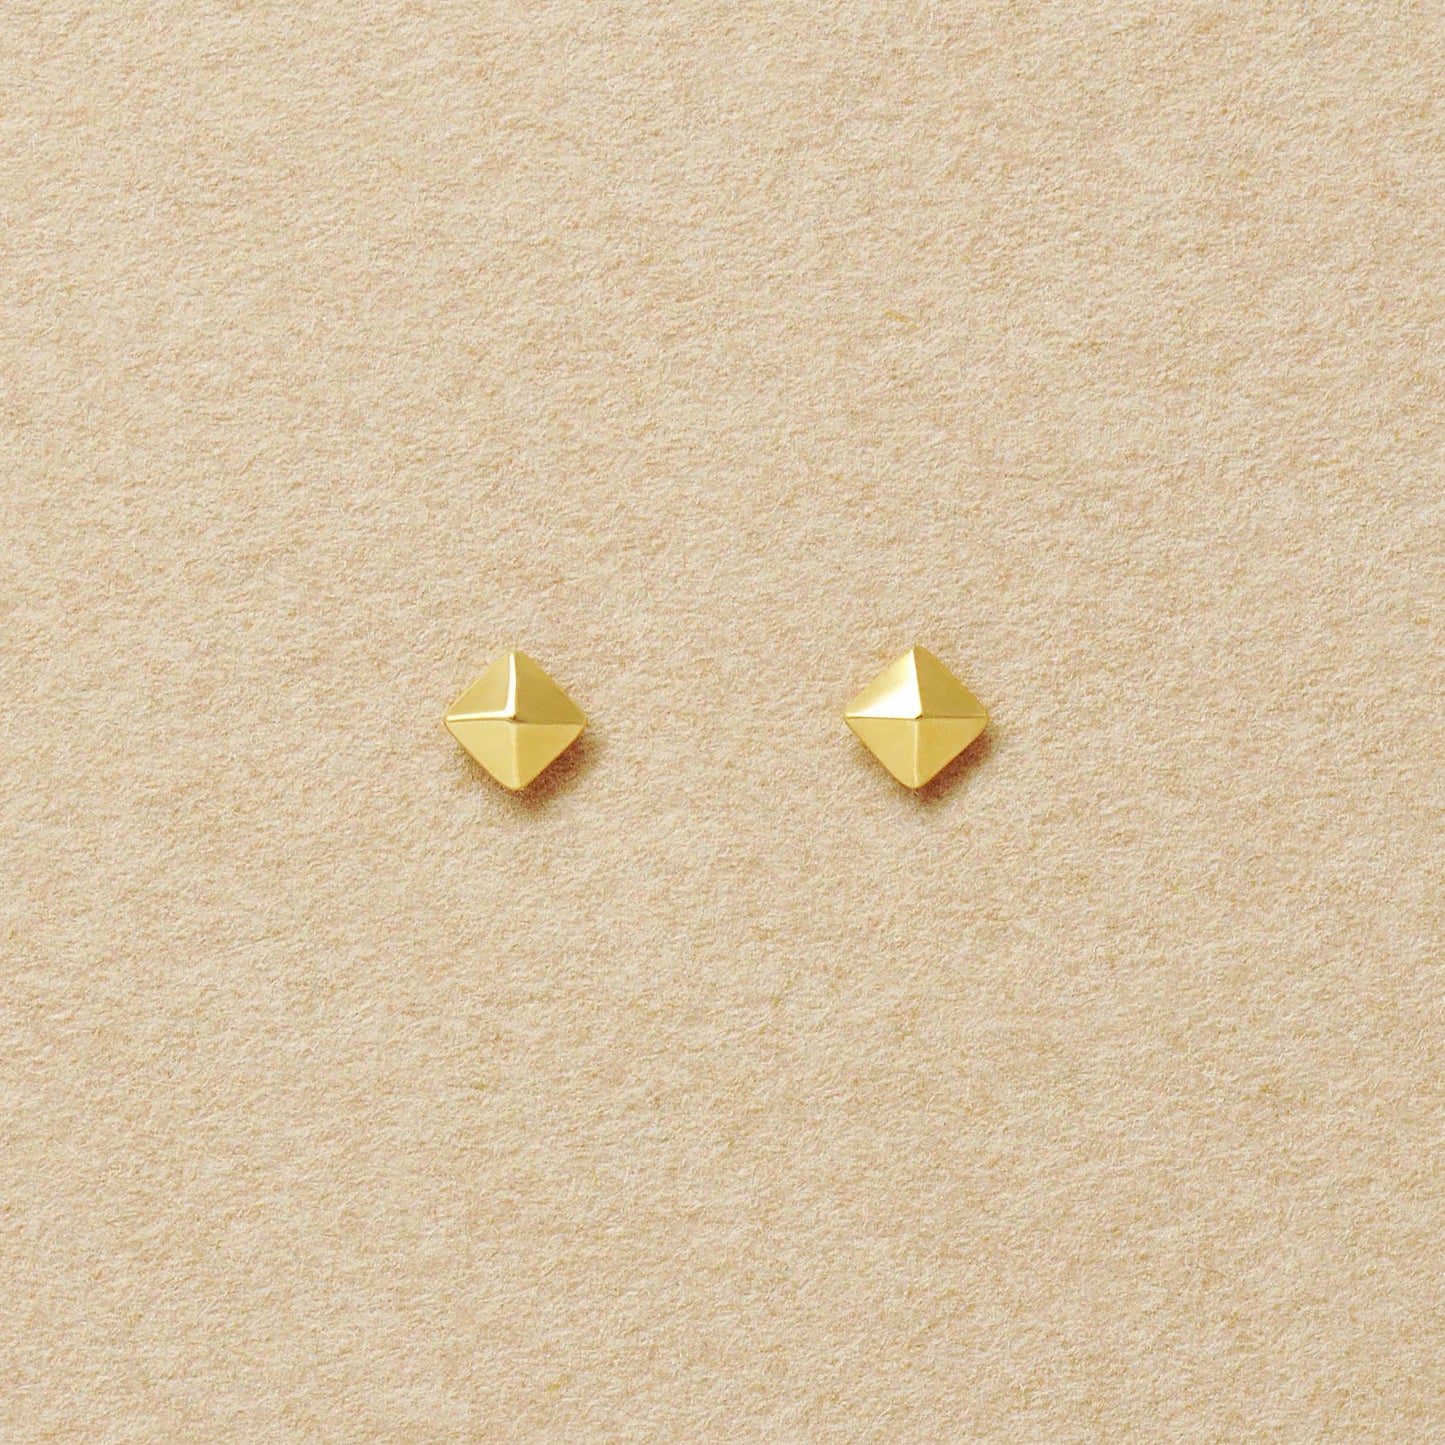 [Second Earrings] 18K Pyramid Stud Earrings (Yellow Gold) - Product Image